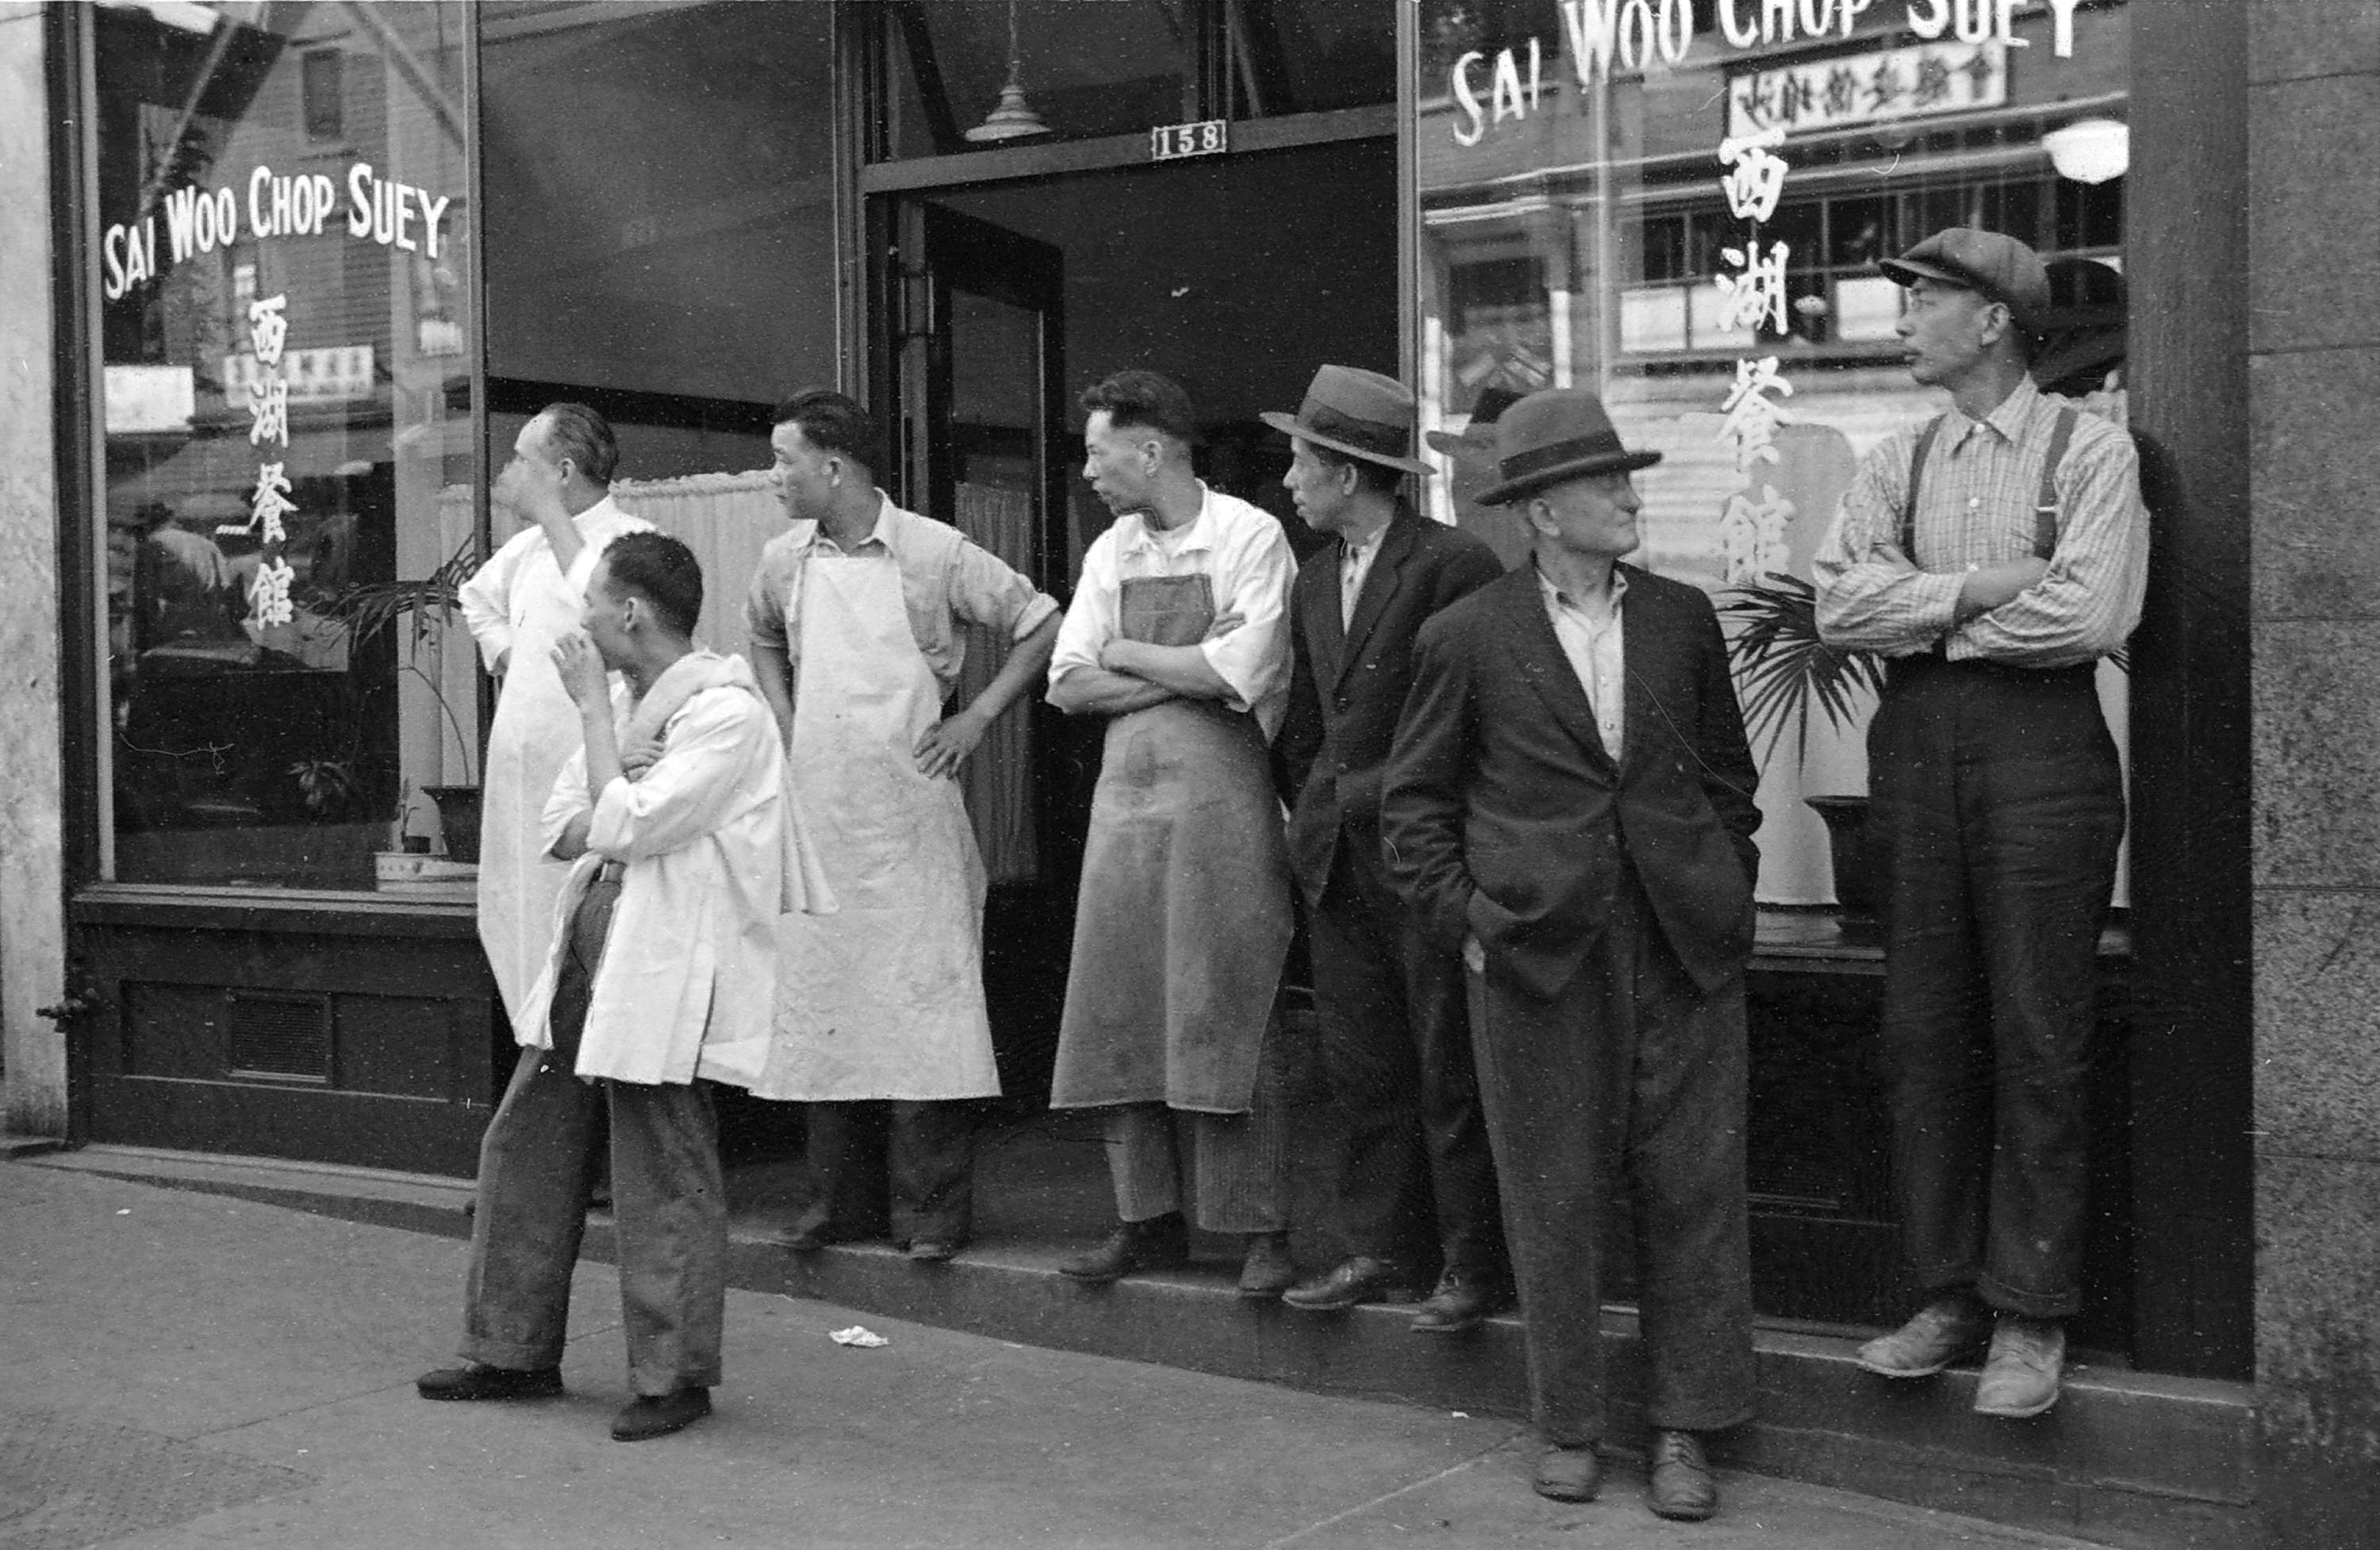 Seven men stand outside a restaurant, some dressed like kitchen workers and others in suits.